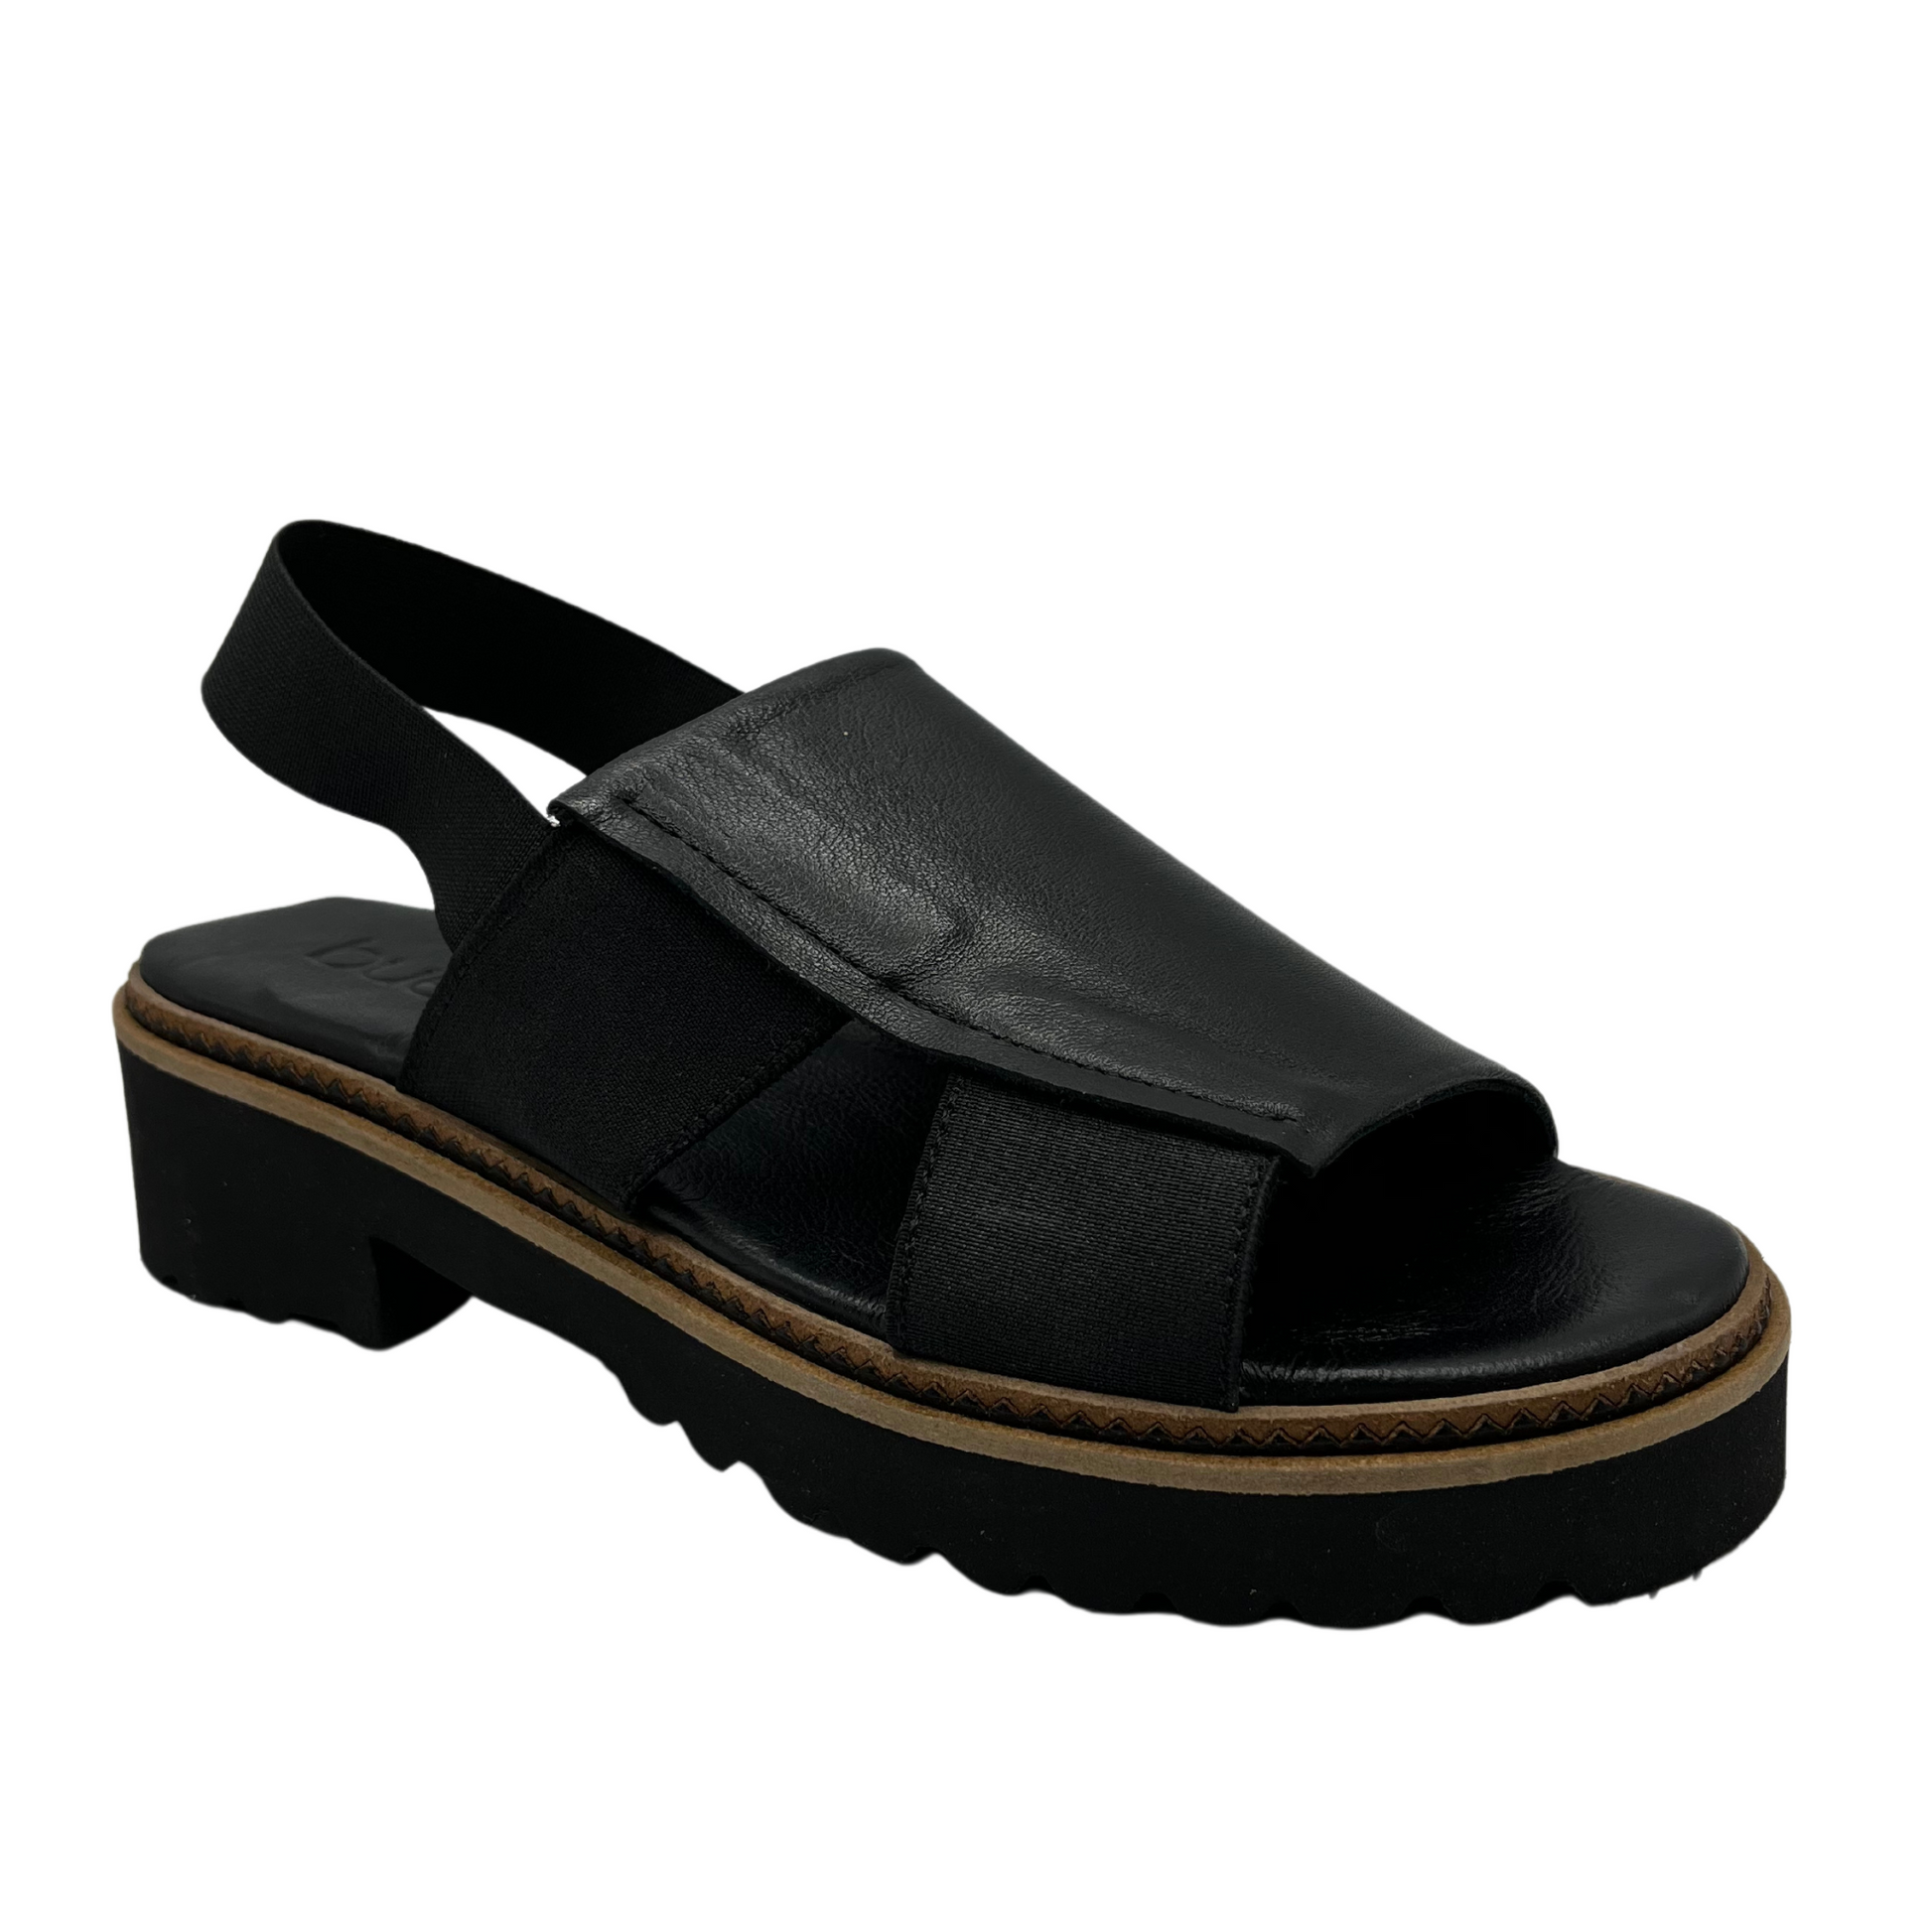 45 degree angled view of black slip on sandal with chunky black sole